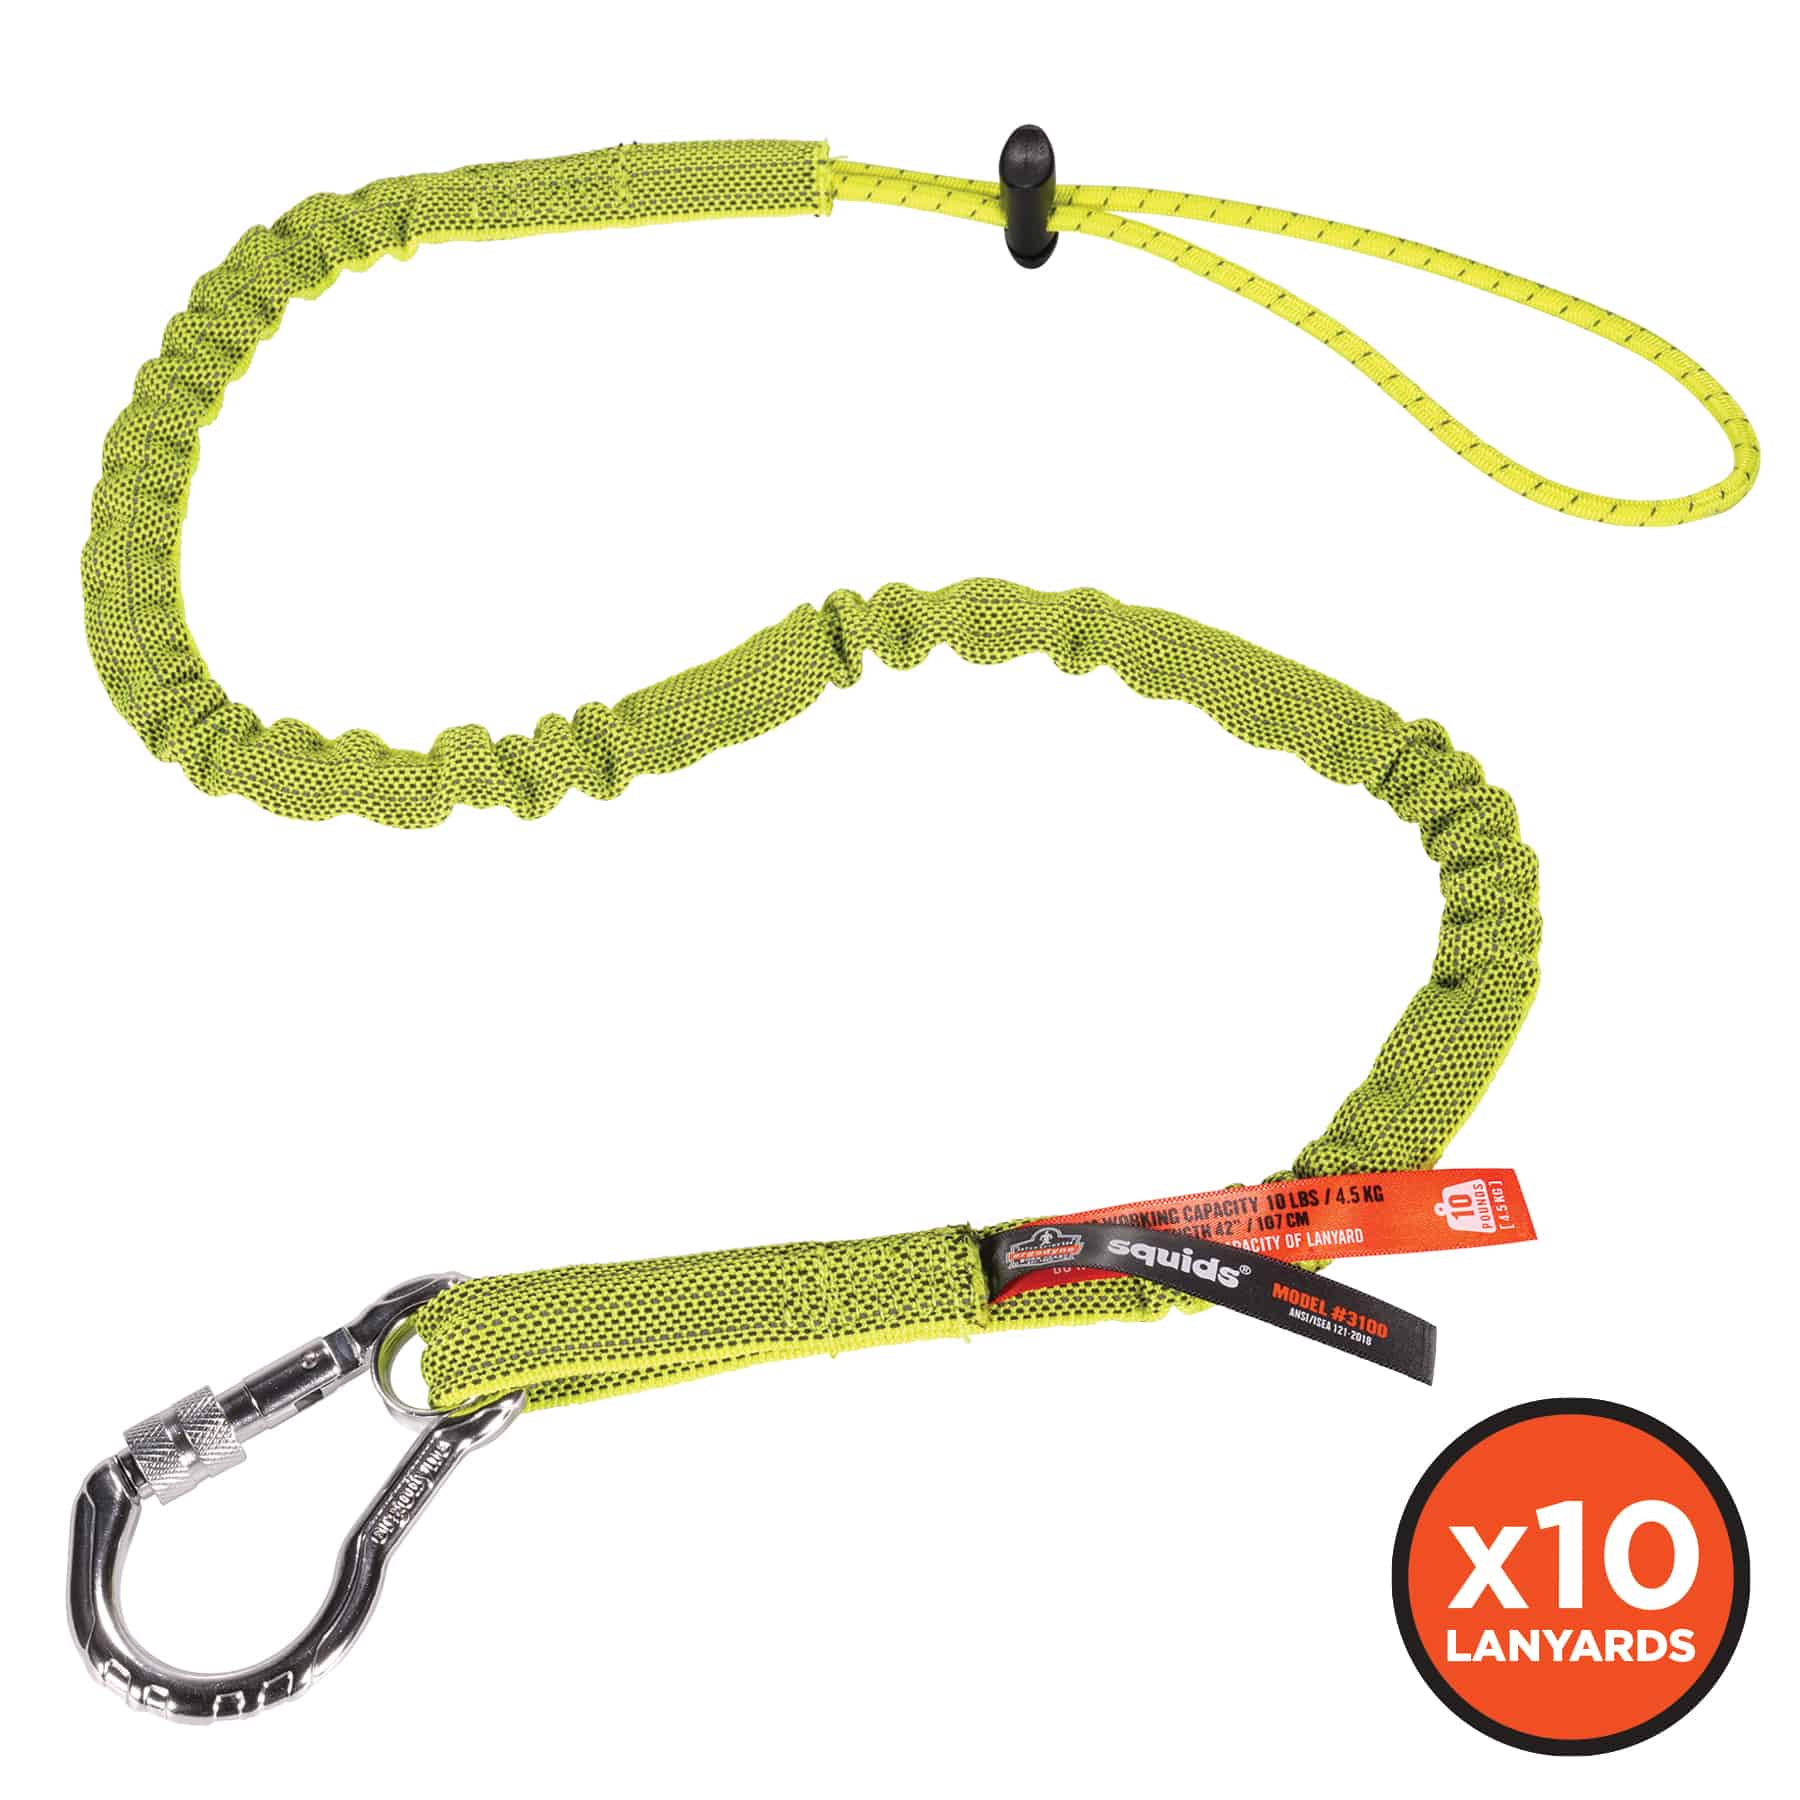 Ergodyne 3100-BULK Lime Single Tool Lanyard - Case 10 in the Accessories department at Lowes.com